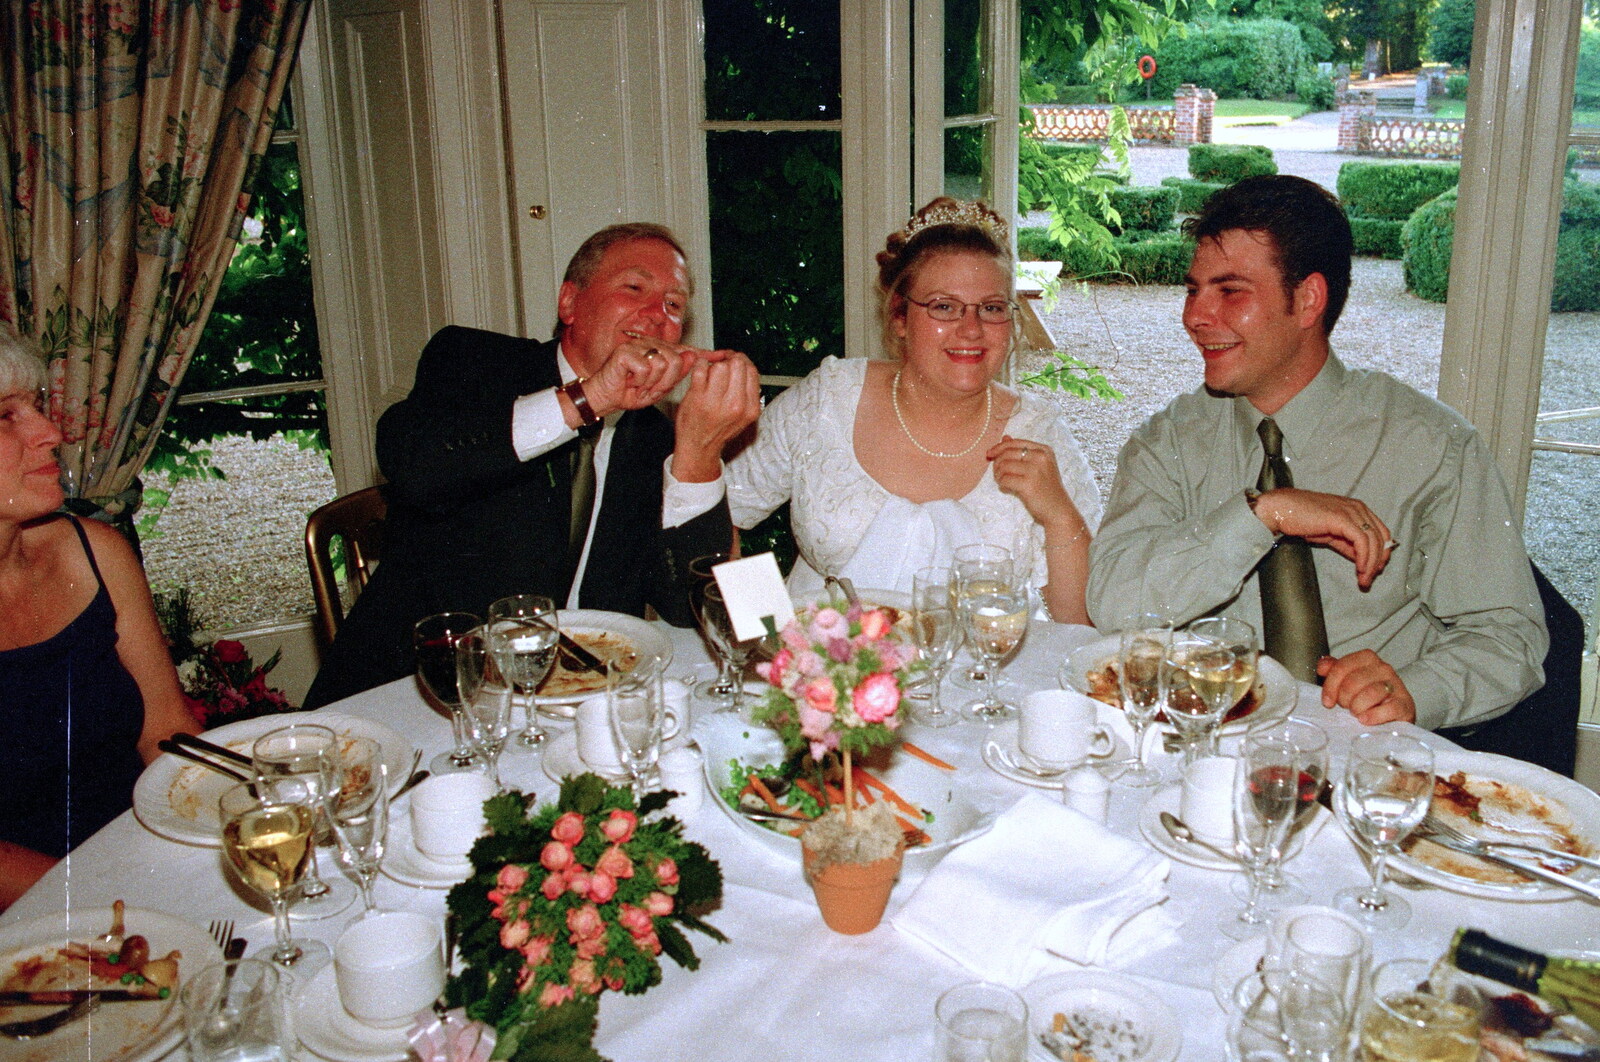 John Willy, Helen and Neil from Helen and Neil's Wedding, The Oaksmere, Brome, Suffolk - 4th August 2000